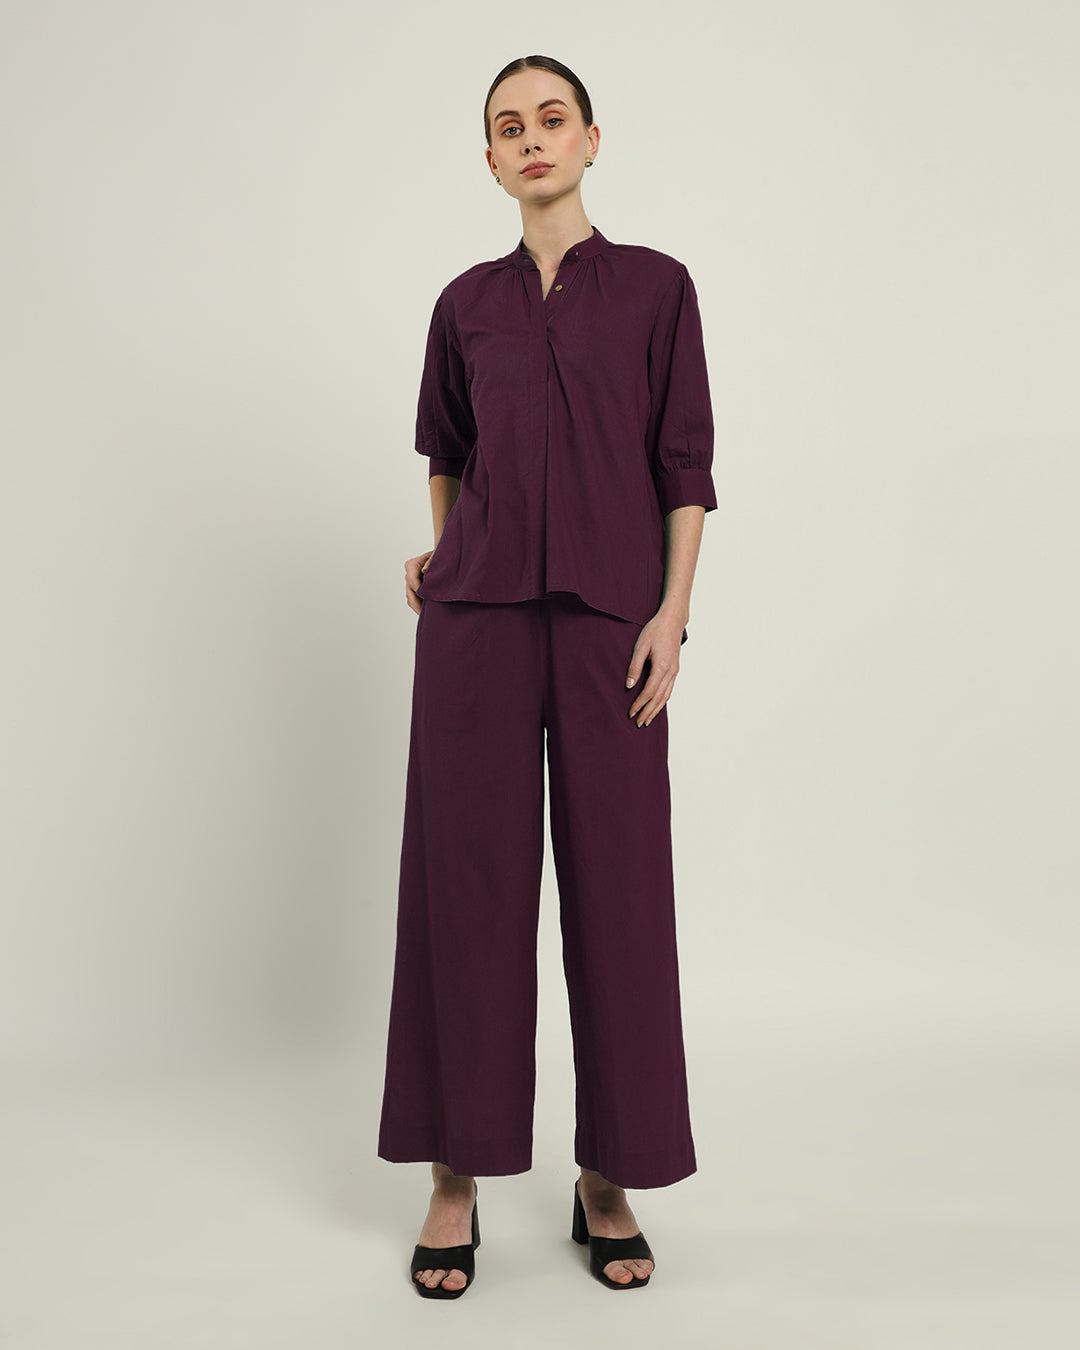 Plum Passion Relaxed Button-Down Shirt Solid Co-ord set